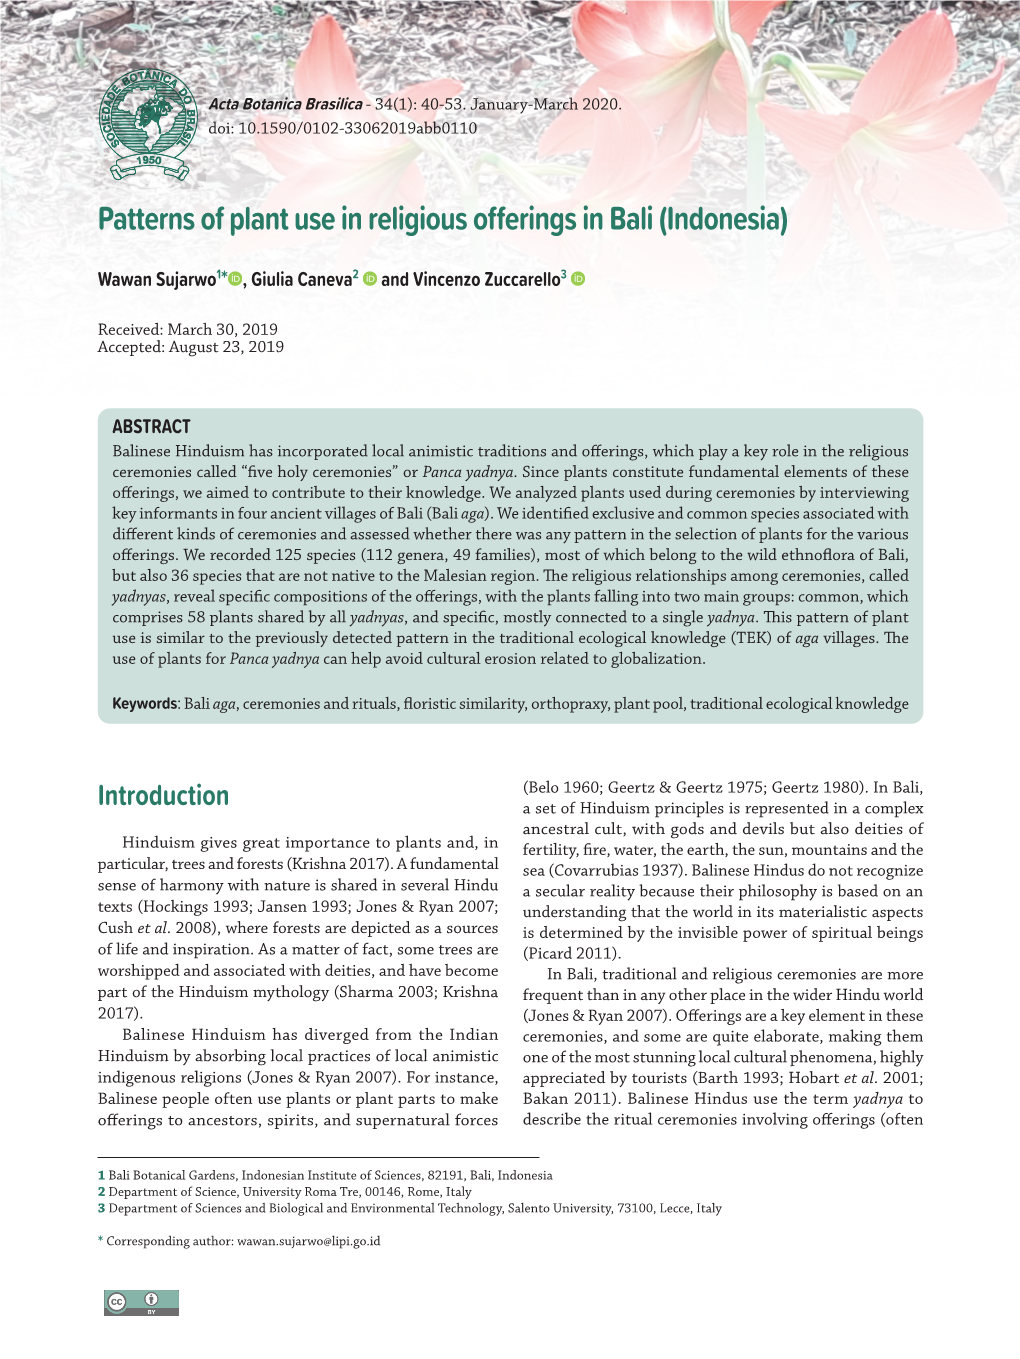 Patterns of Plant Use in Religious Offerings in Bali (Indonesia)